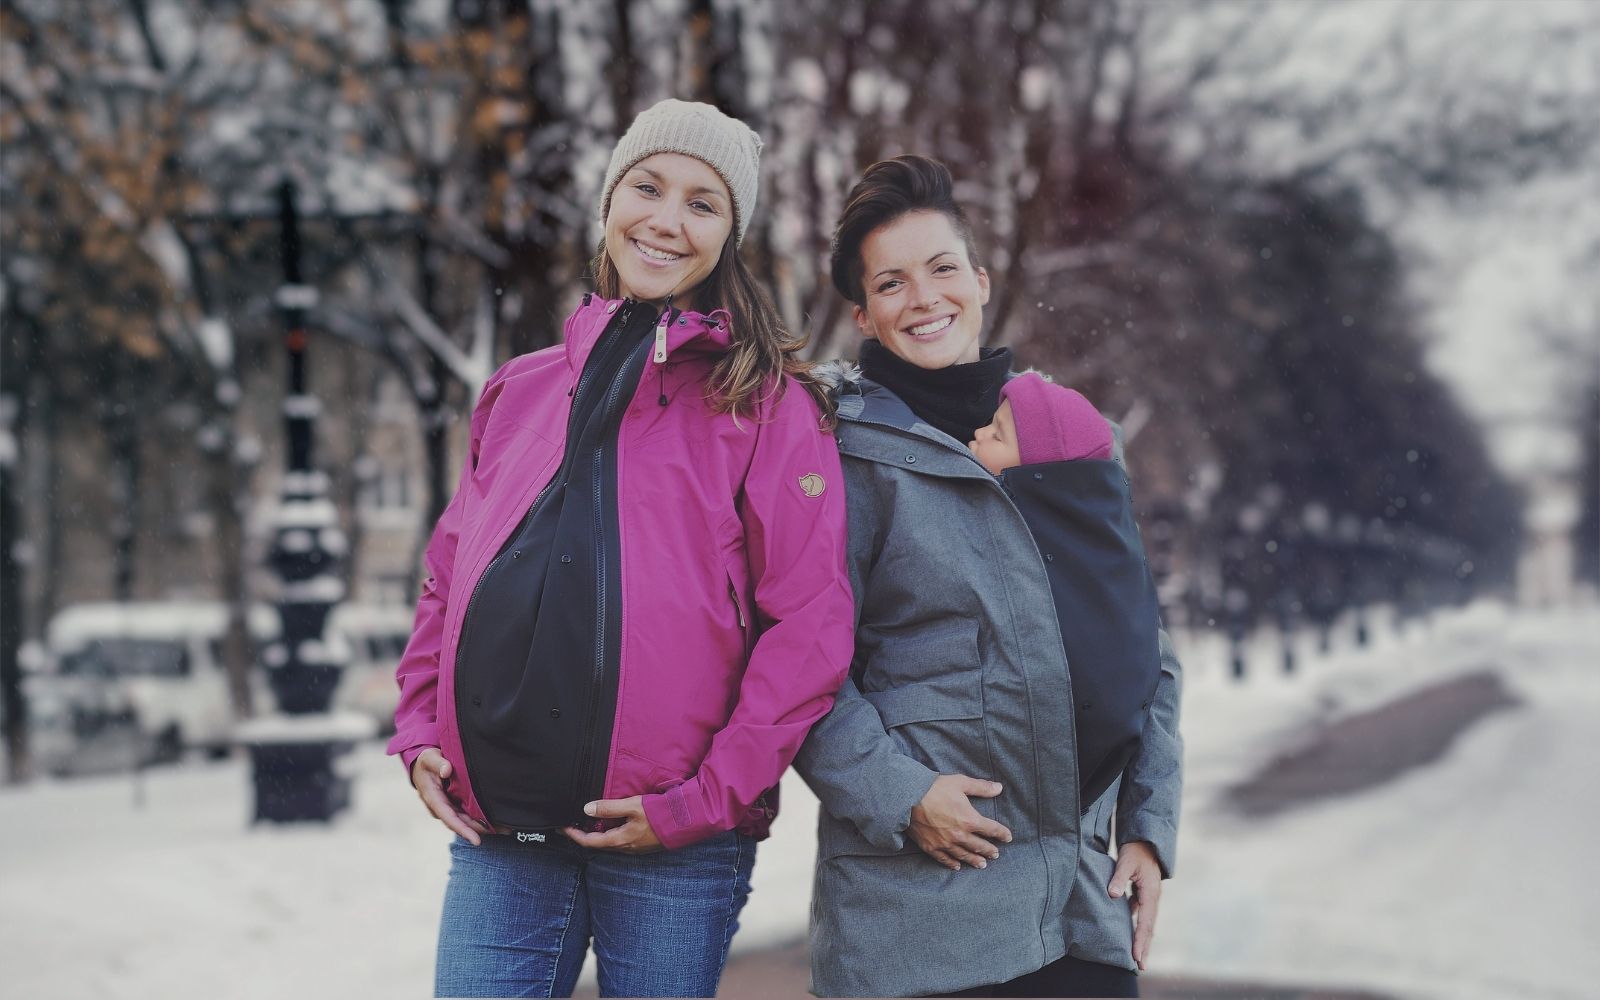 A pregnant woman and a babywearing woman standing side by side smiling with jacket extenders on their jackets in a snowy park 